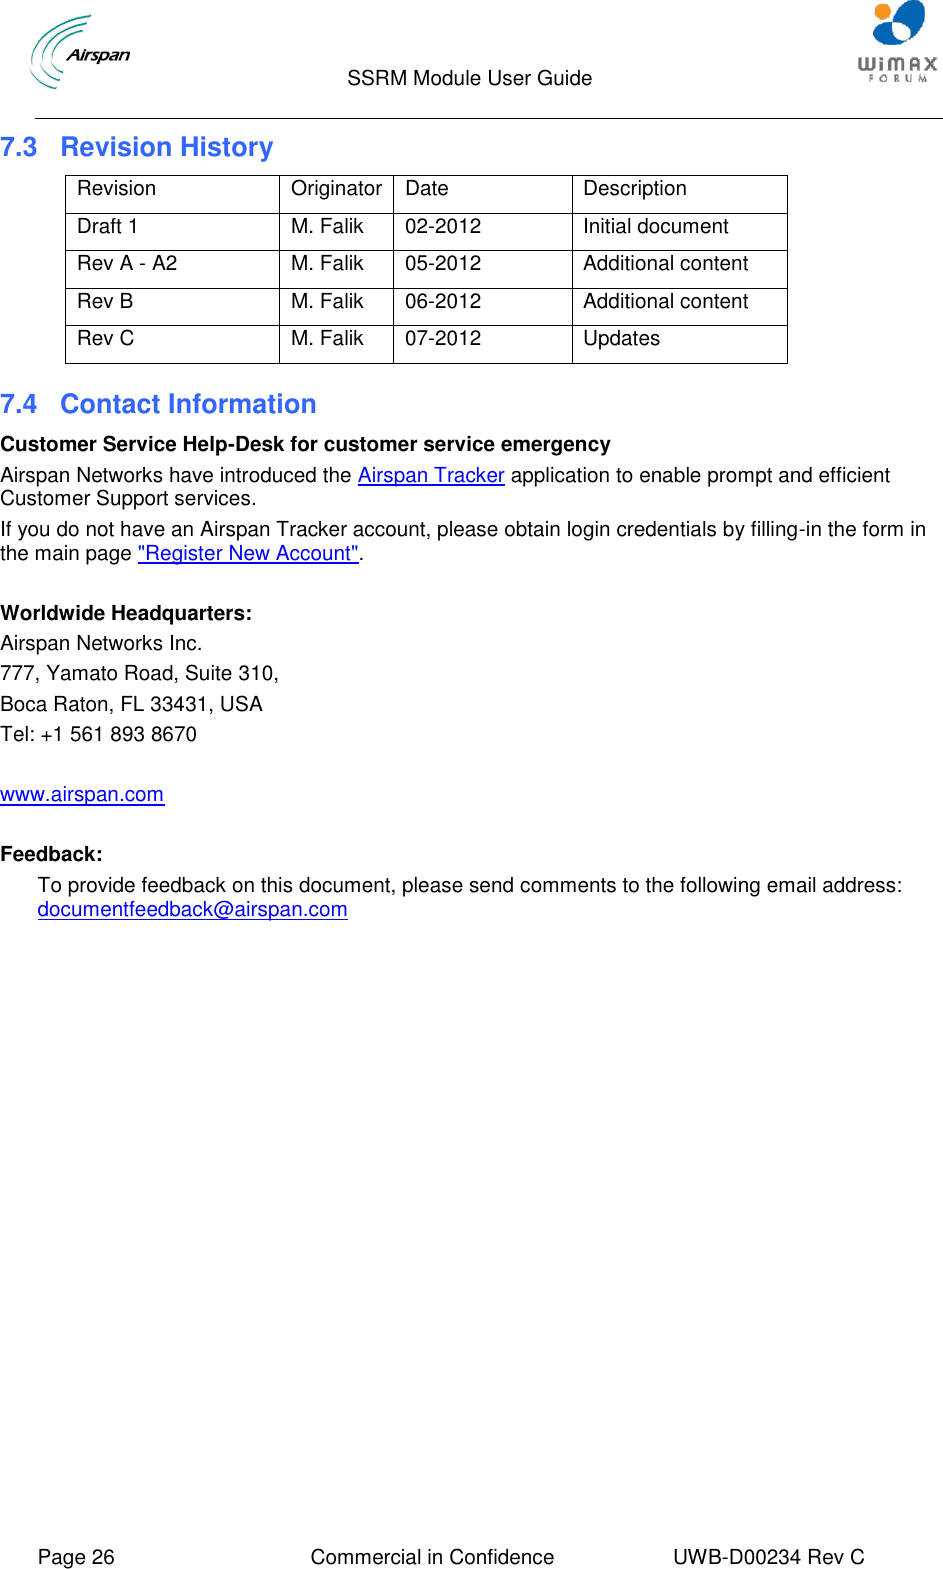                                  SSRM Module User Guide     Page 26  Commercial in Confidence  UWB-D00234 Rev C    7.3  Revision History Revision Originator Date Description Draft 1 M. Falik 02-2012 Initial document Rev A - A2 M. Falik 05-2012 Additional content Rev B M. Falik 06-2012 Additional content Rev C M. Falik 07-2012 Updates 7.4 Contact Information Customer Service Help-Desk for customer service emergency Airspan Networks have introduced the Airspan Tracker application to enable prompt and efficient Customer Support services. If you do not have an Airspan Tracker account, please obtain login credentials by filling-in the form in the main page &quot;Register New Account&quot;.  Worldwide Headquarters: Airspan Networks Inc. 777, Yamato Road, Suite 310, Boca Raton, FL 33431, USA Tel: +1 561 893 8670  www.airspan.com  Feedback: To provide feedback on this document, please send comments to the following email address: documentfeedback@airspan.com 